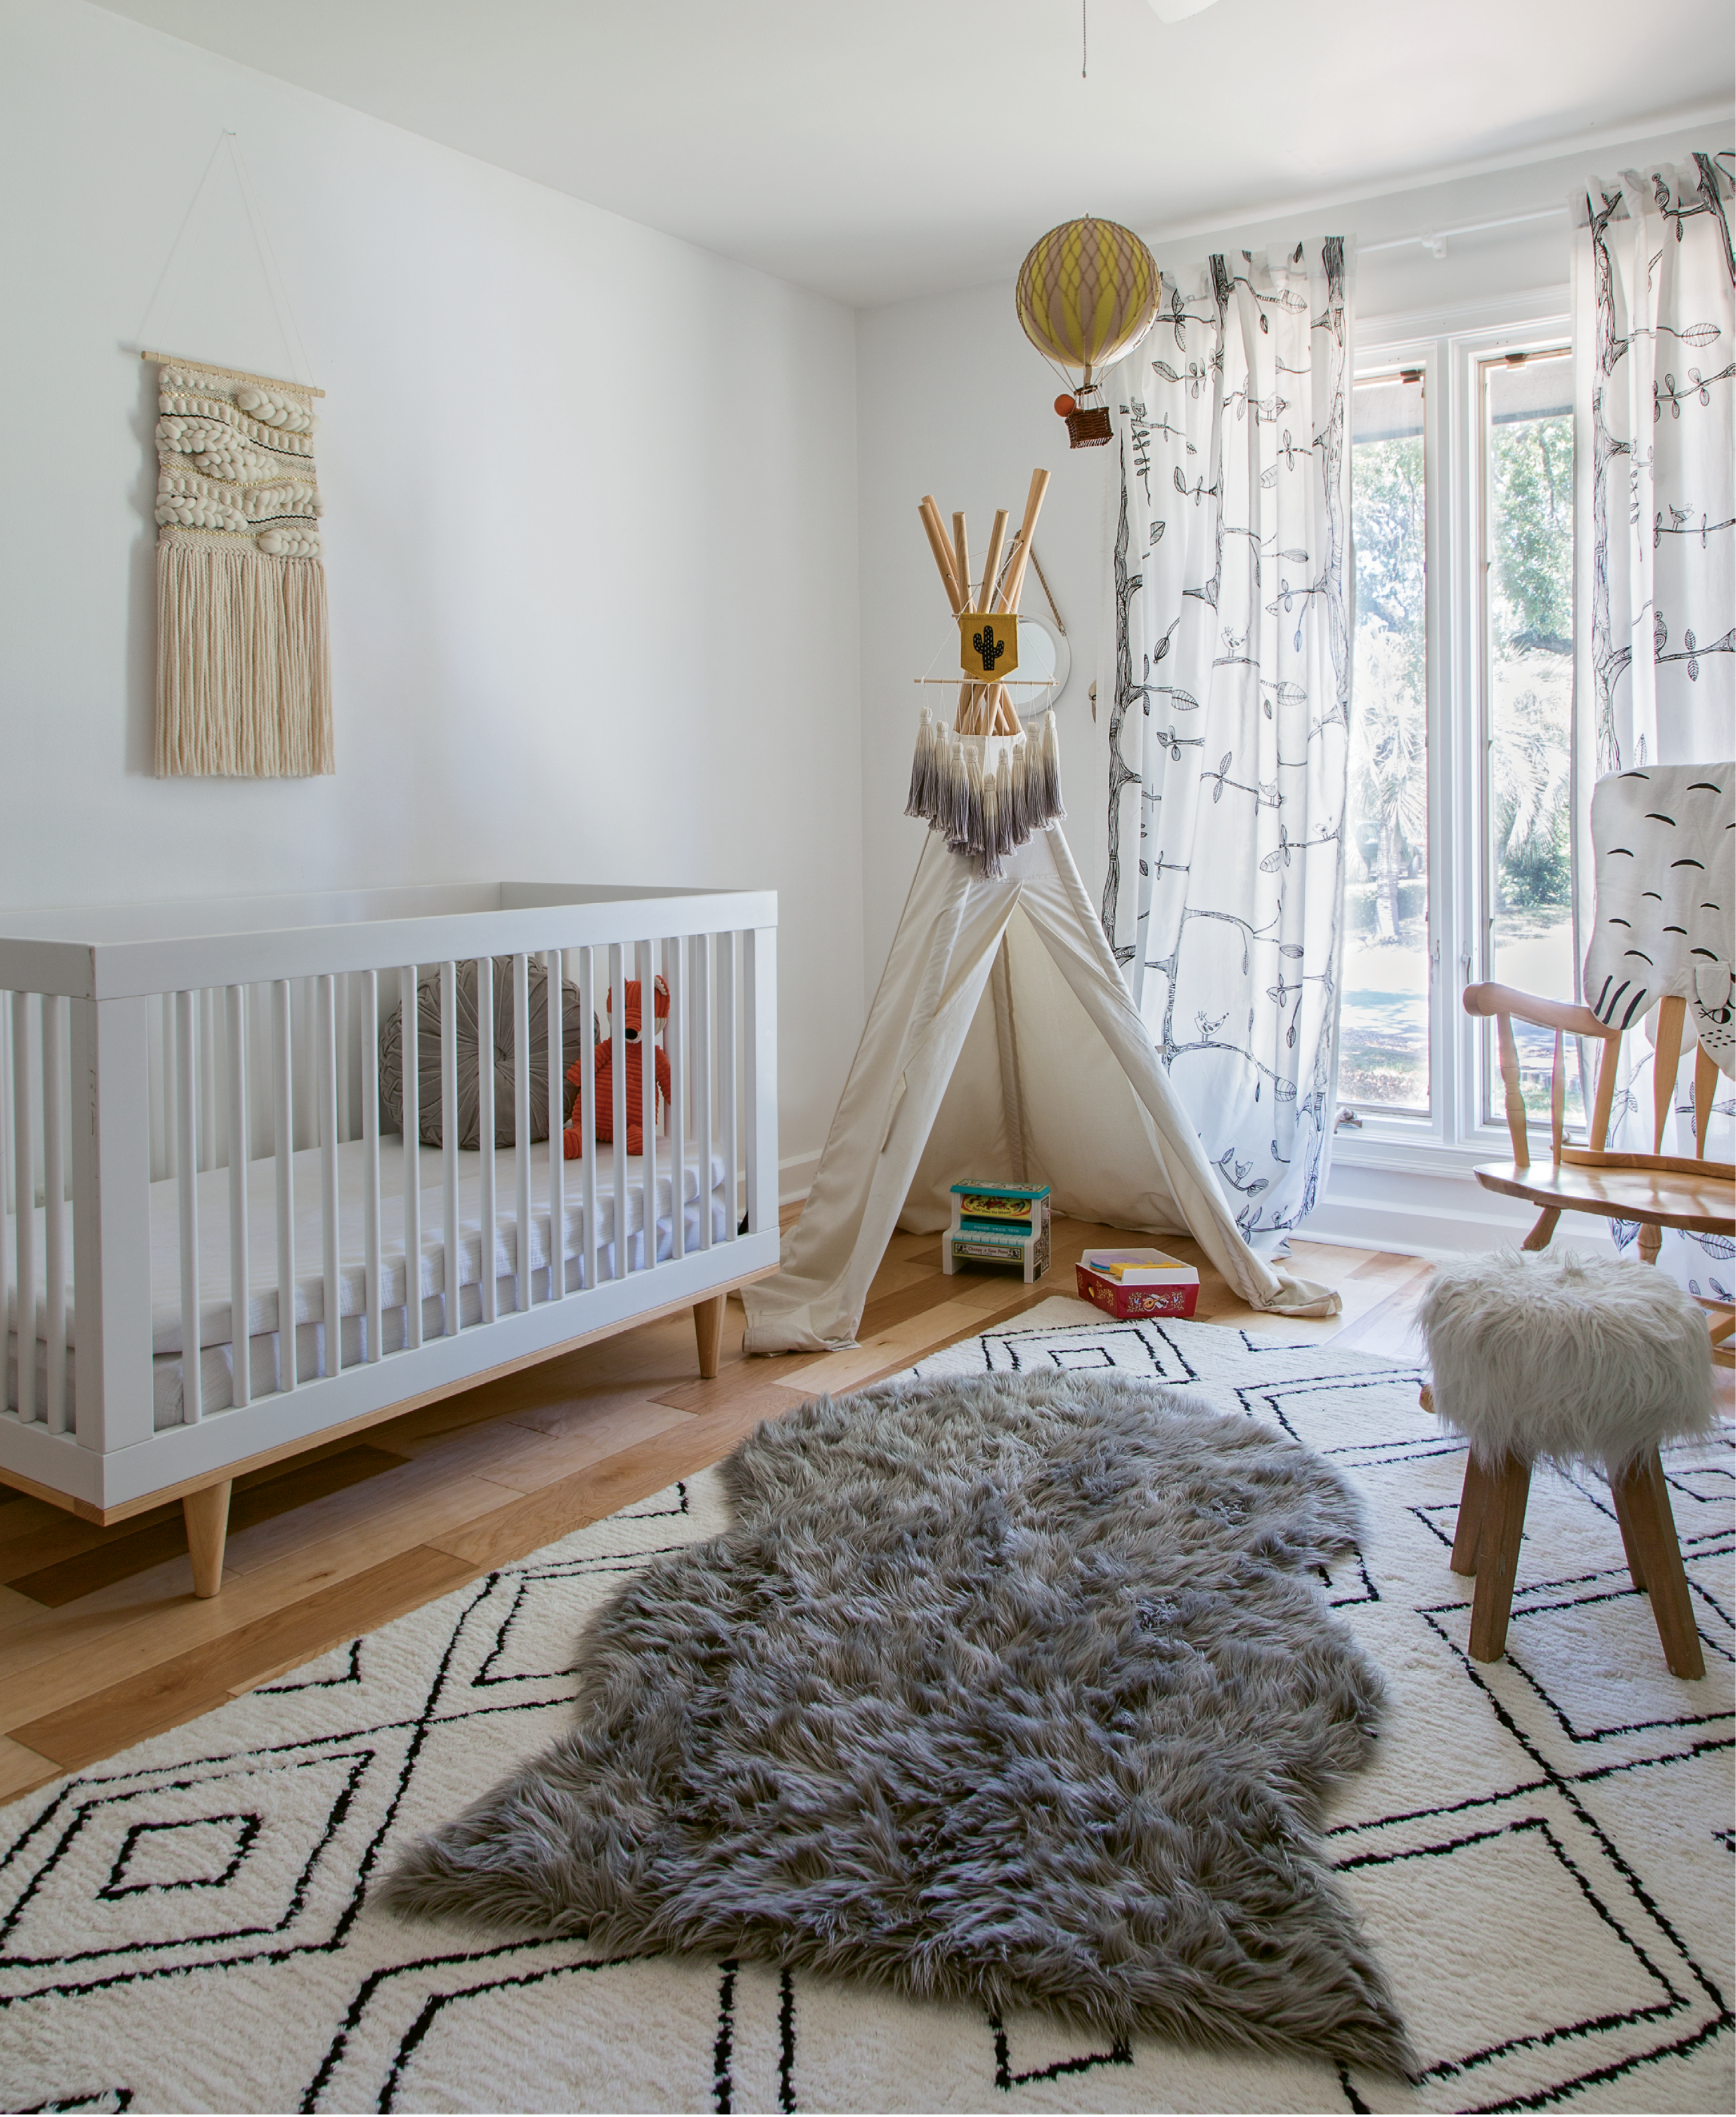 COOL KIDS: The nursery is playful and fun, but still feels sophisticated thanks to a black-and-white palette.